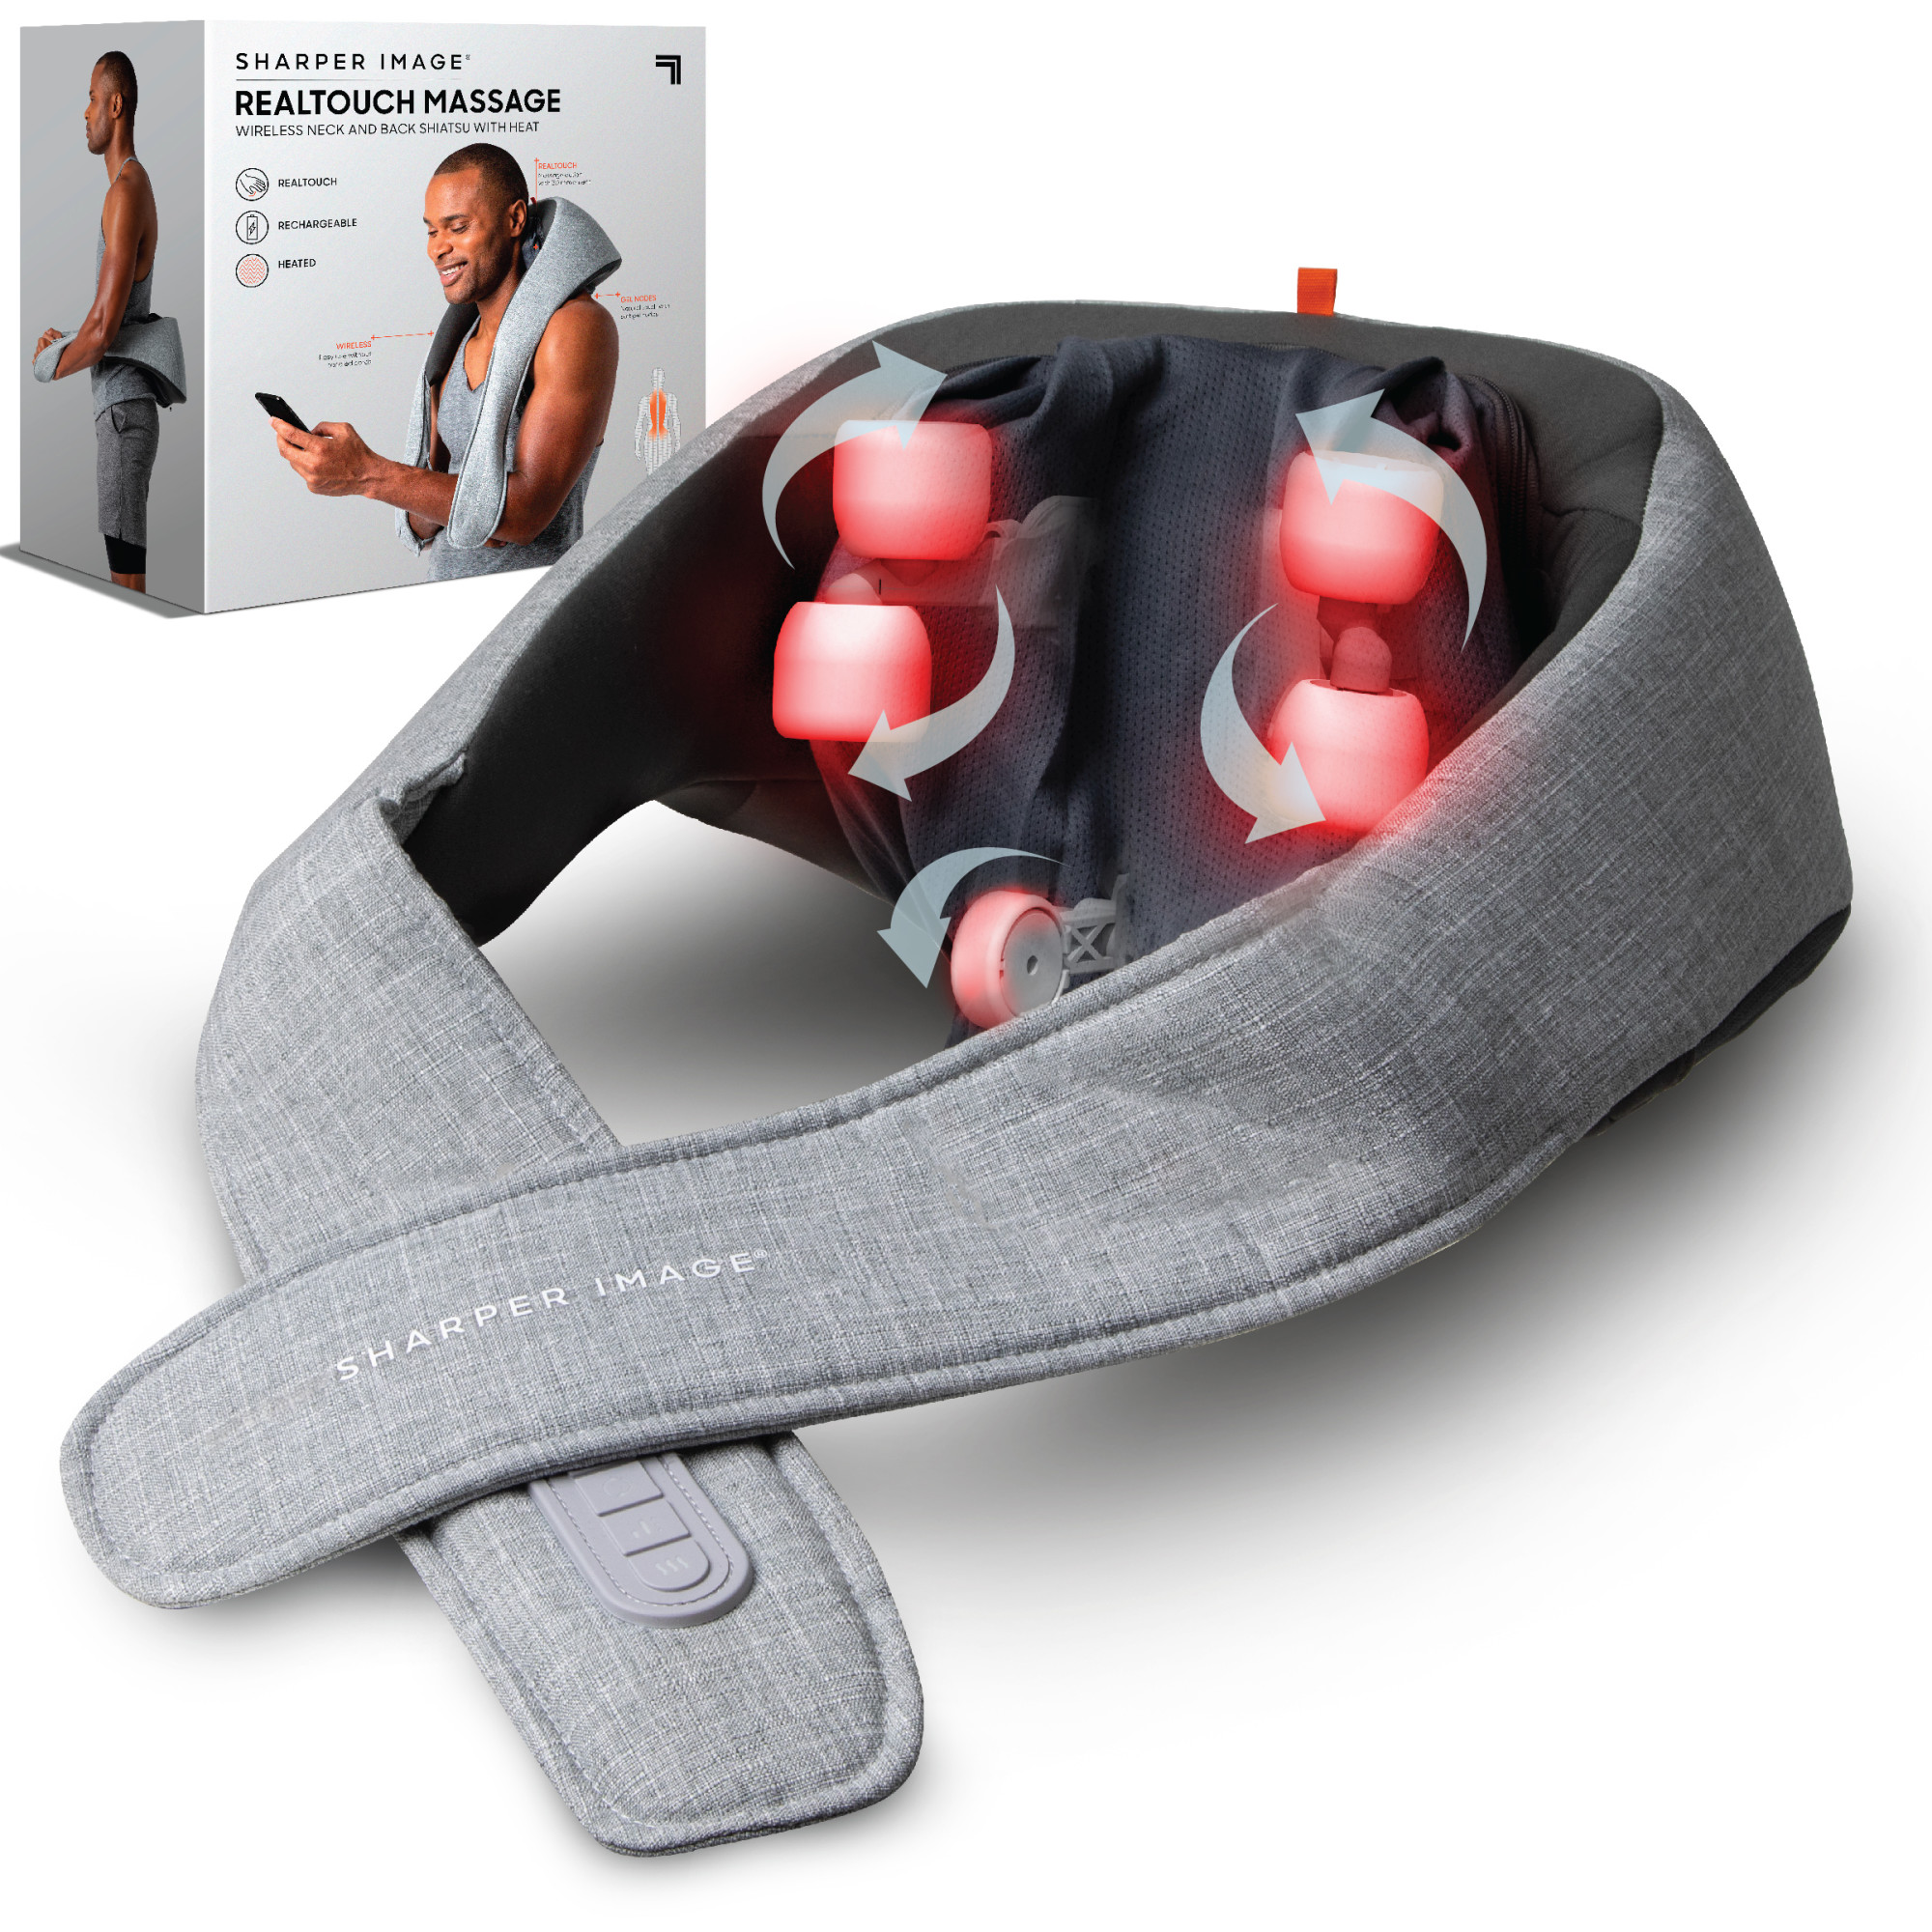 Sharper Image® Realtouch Shiatsu Massager, Warming Heat Soothes Sore Muscles, Nodes Feel Like Real Hands, Wireless & Rechargeable - Best Massager for Neck Back Shoulders Feet Legs w/ 6 Massage Heads